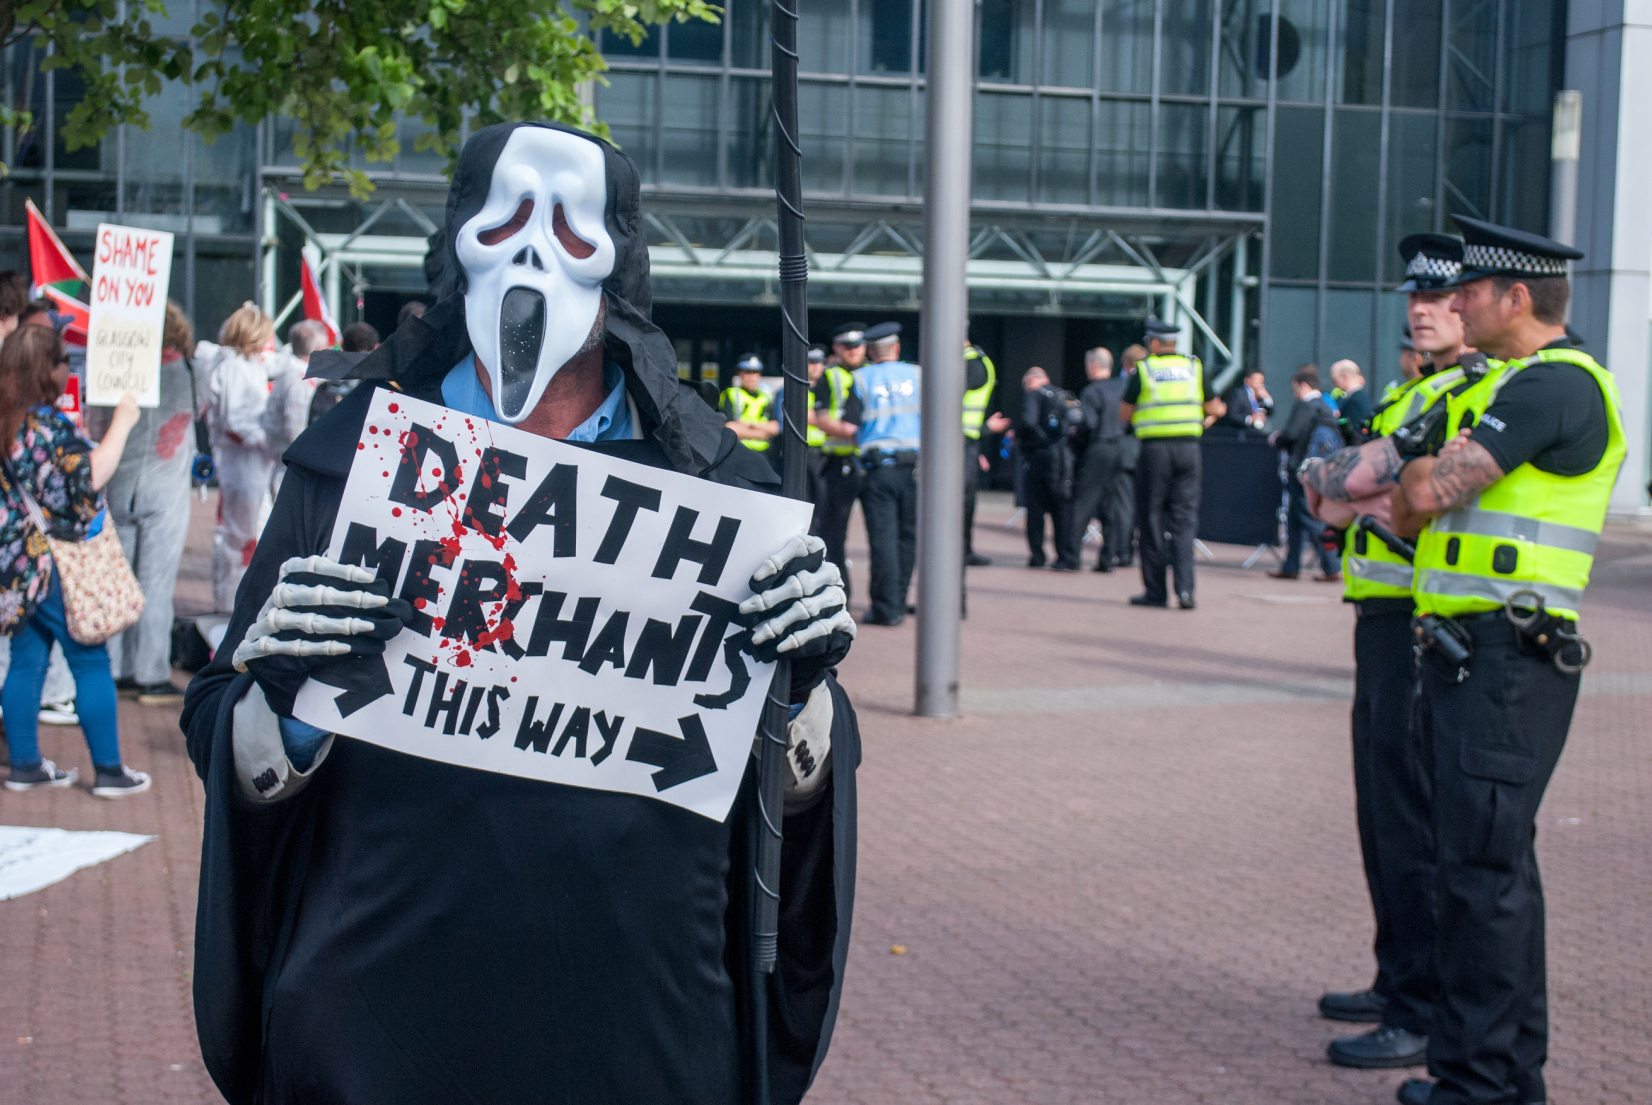 grim reaper next to police with sign 'death merchants this way'